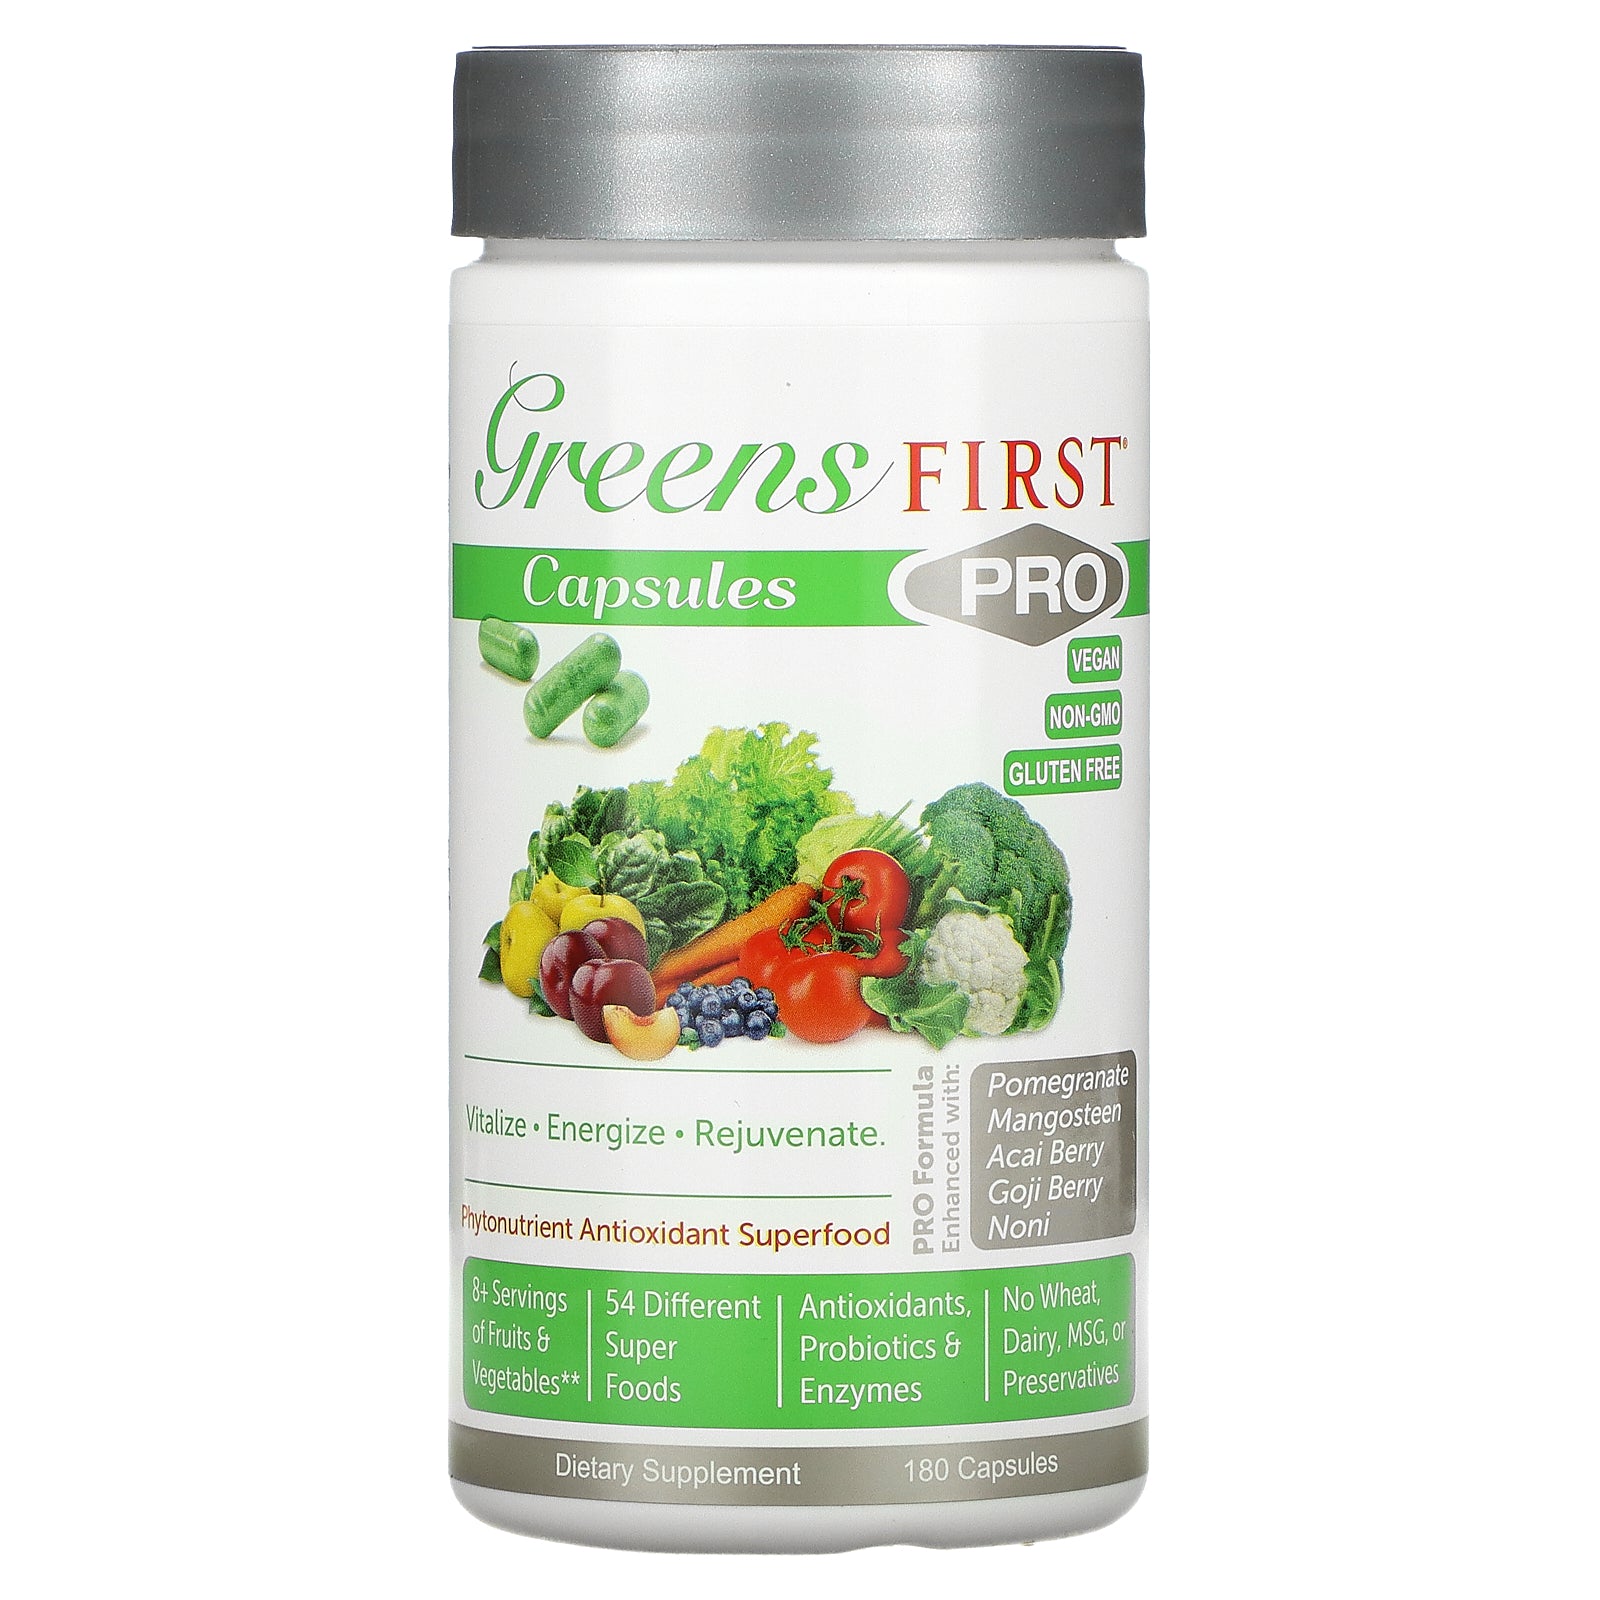 Greens First, PRO Phytonutrient Antioxidant Superfood Capsules